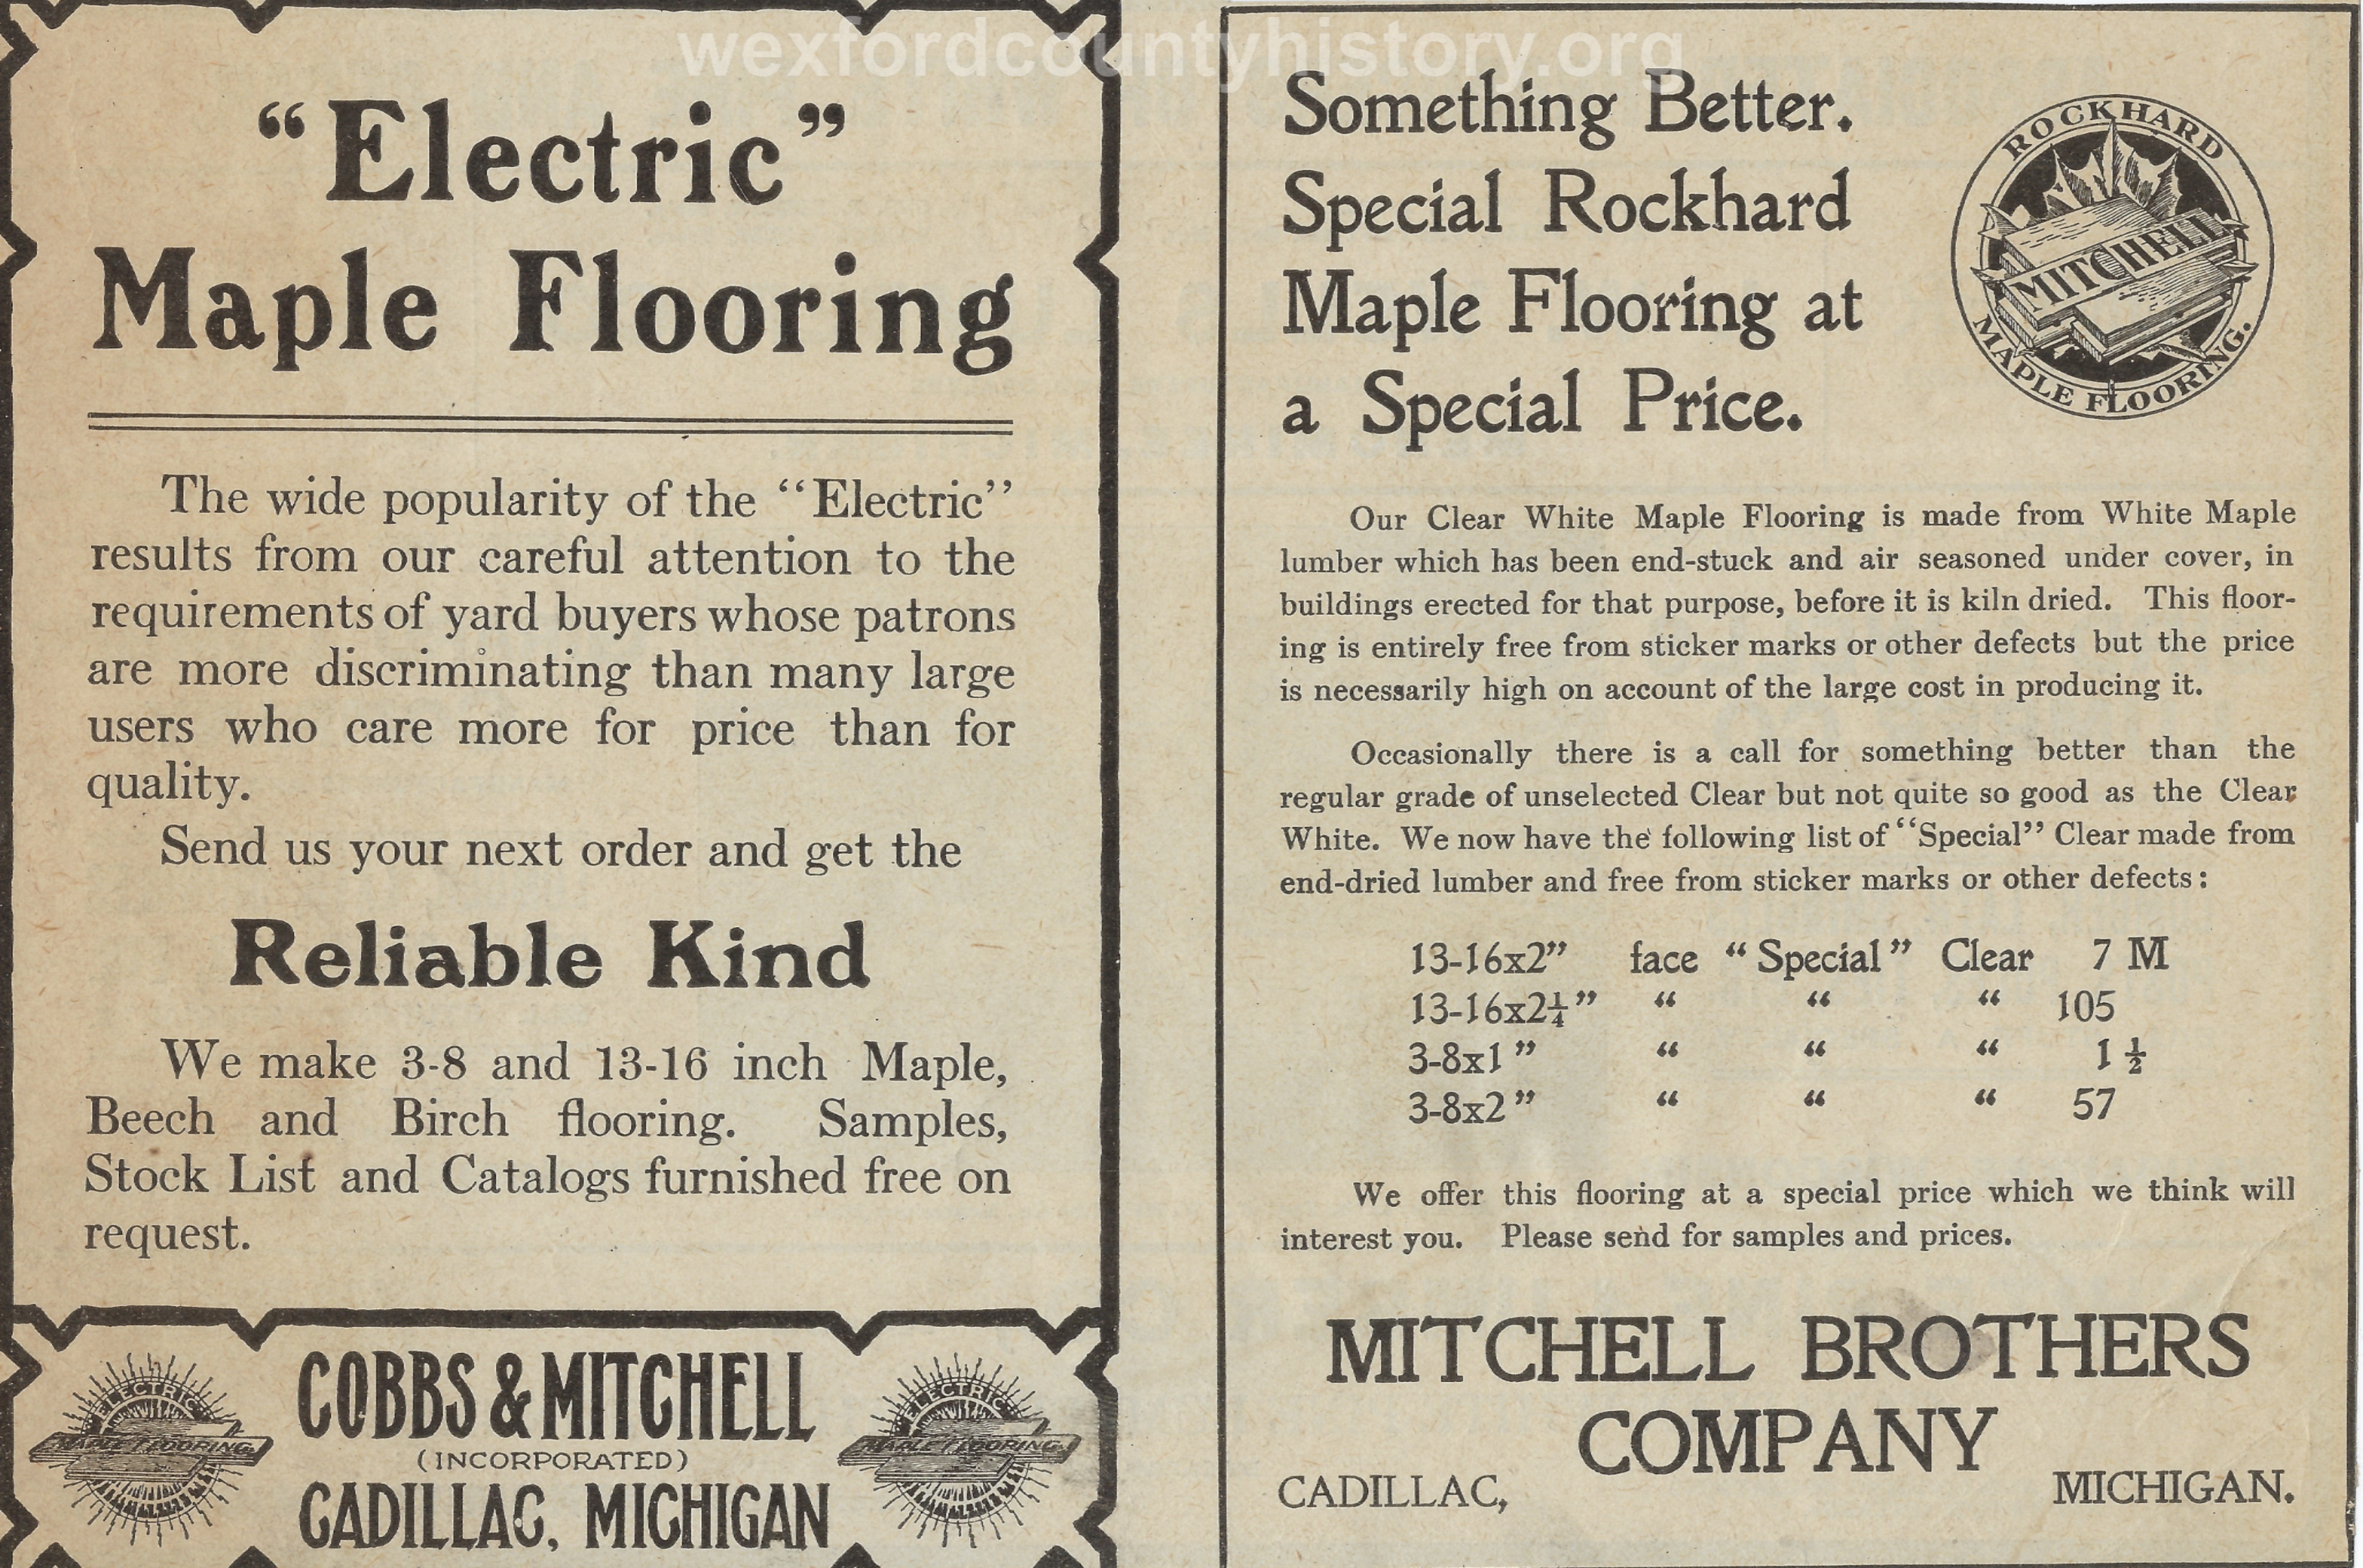 Cadillac-Business-Cobbs-And-Mitchell-Electric-Flooring-Plant-15